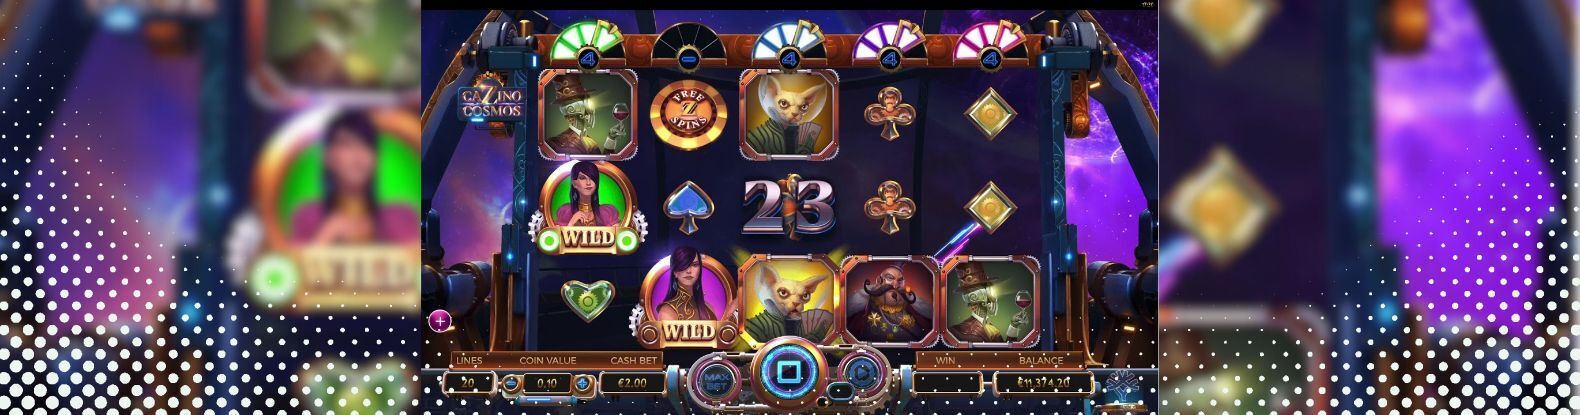 This is a screenshot of Cazino Cosmos Pokies Game by Yggdrasil